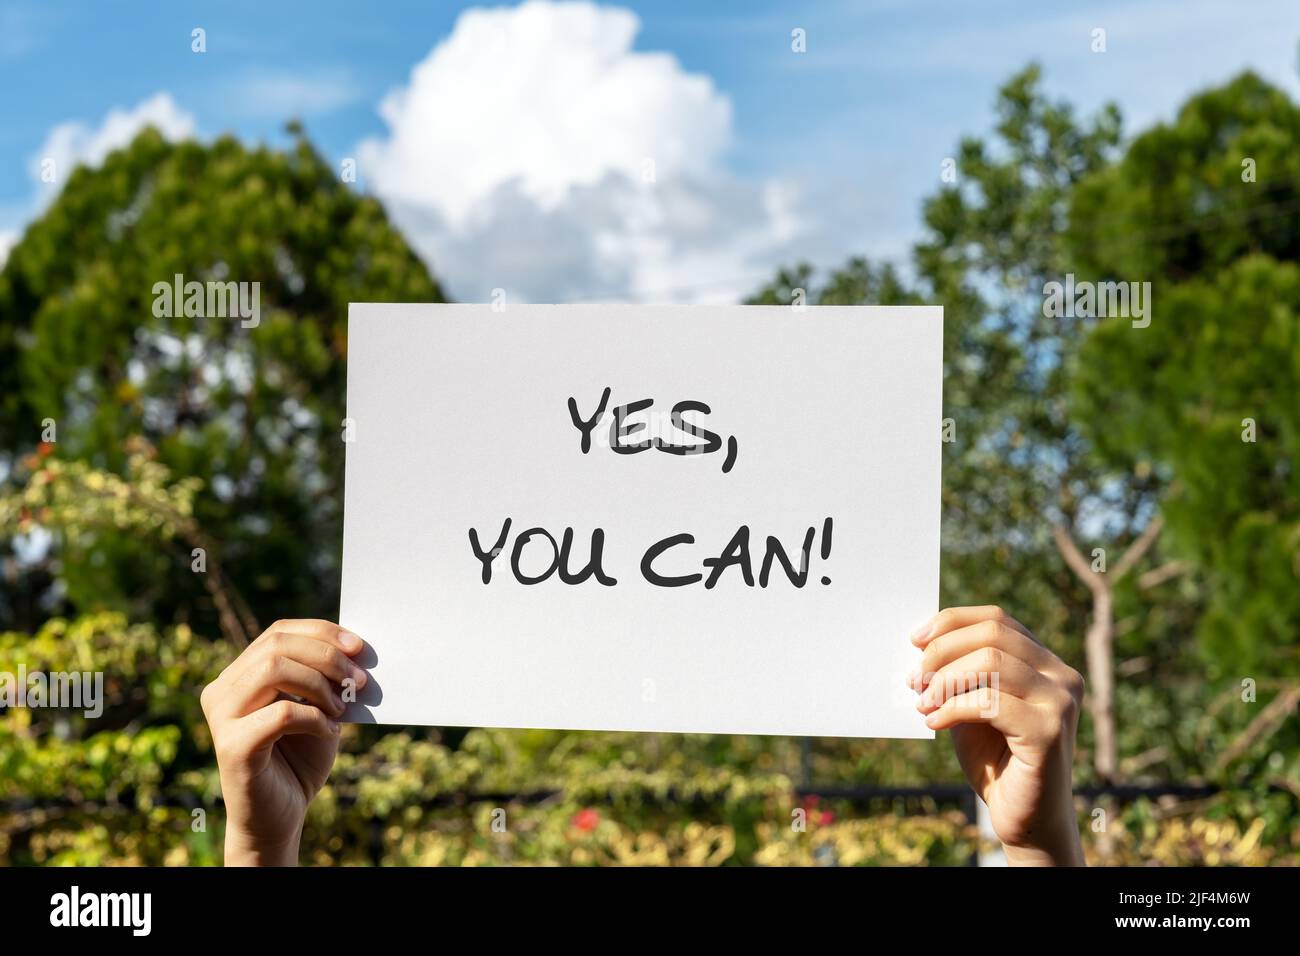 Life motivational and inspirational quotes: Yes you can Stock Photo